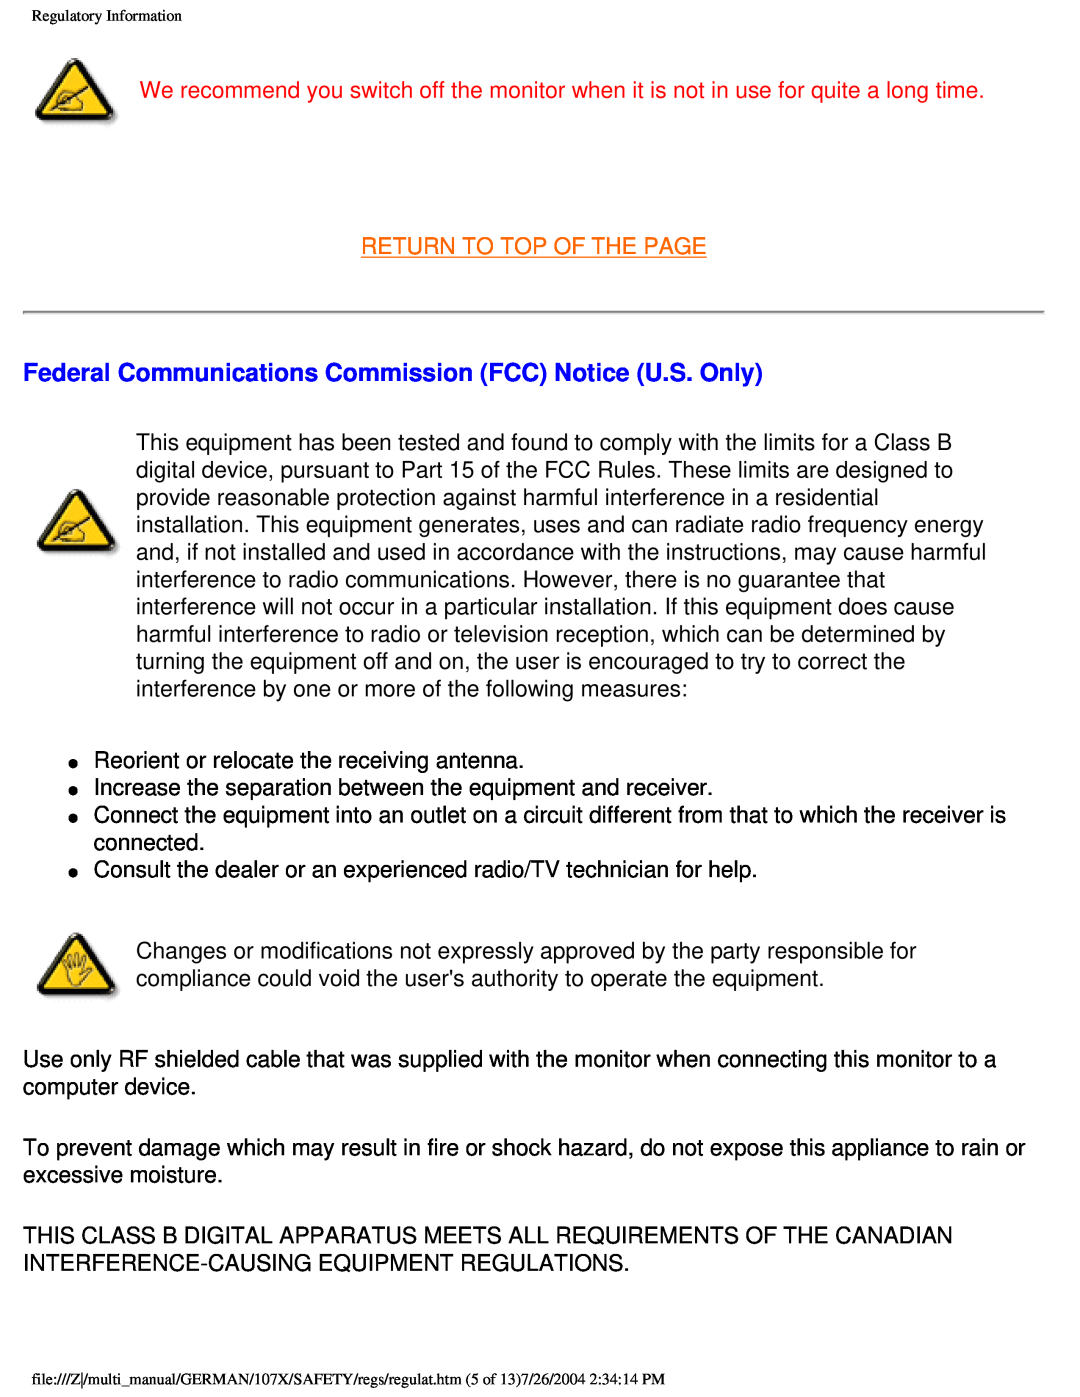 Philips 107X2 user manual Federal Communications Commission FCC Notice U.S. Only, Return To Top Of The Page 